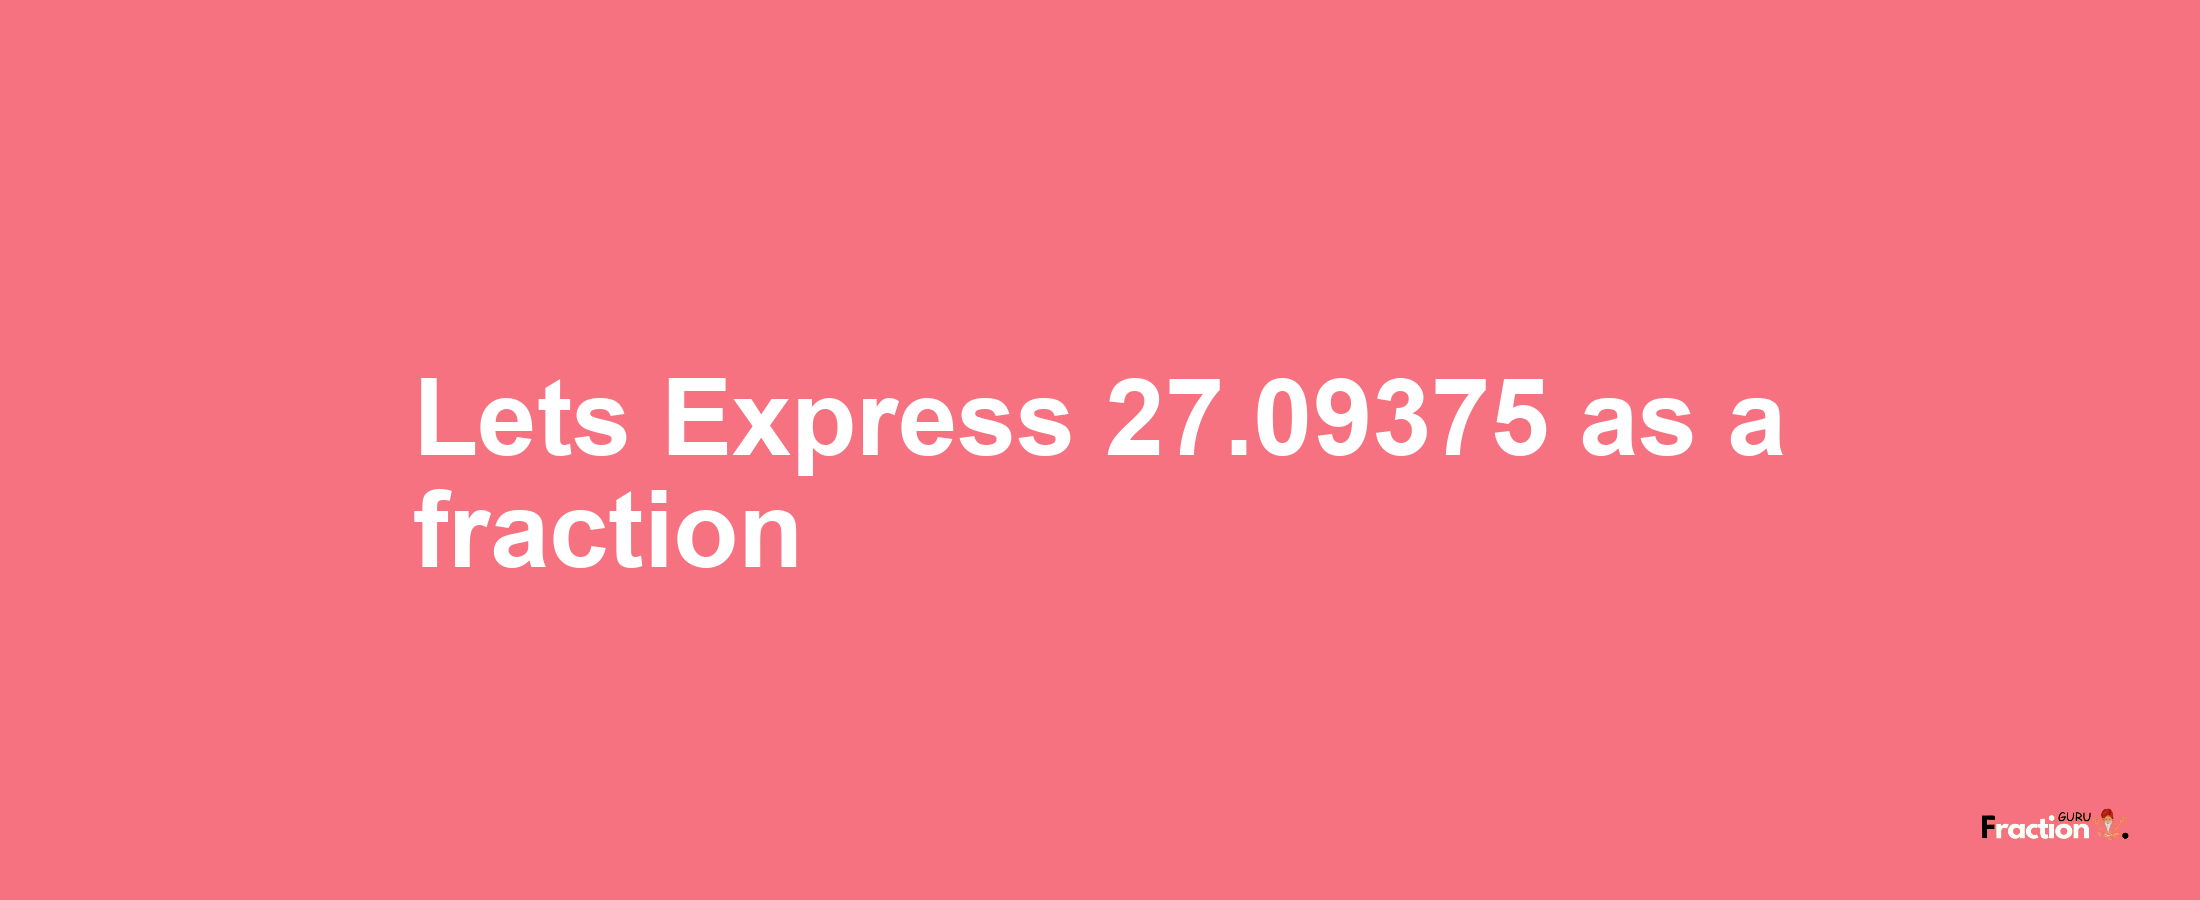 Lets Express 27.09375 as afraction